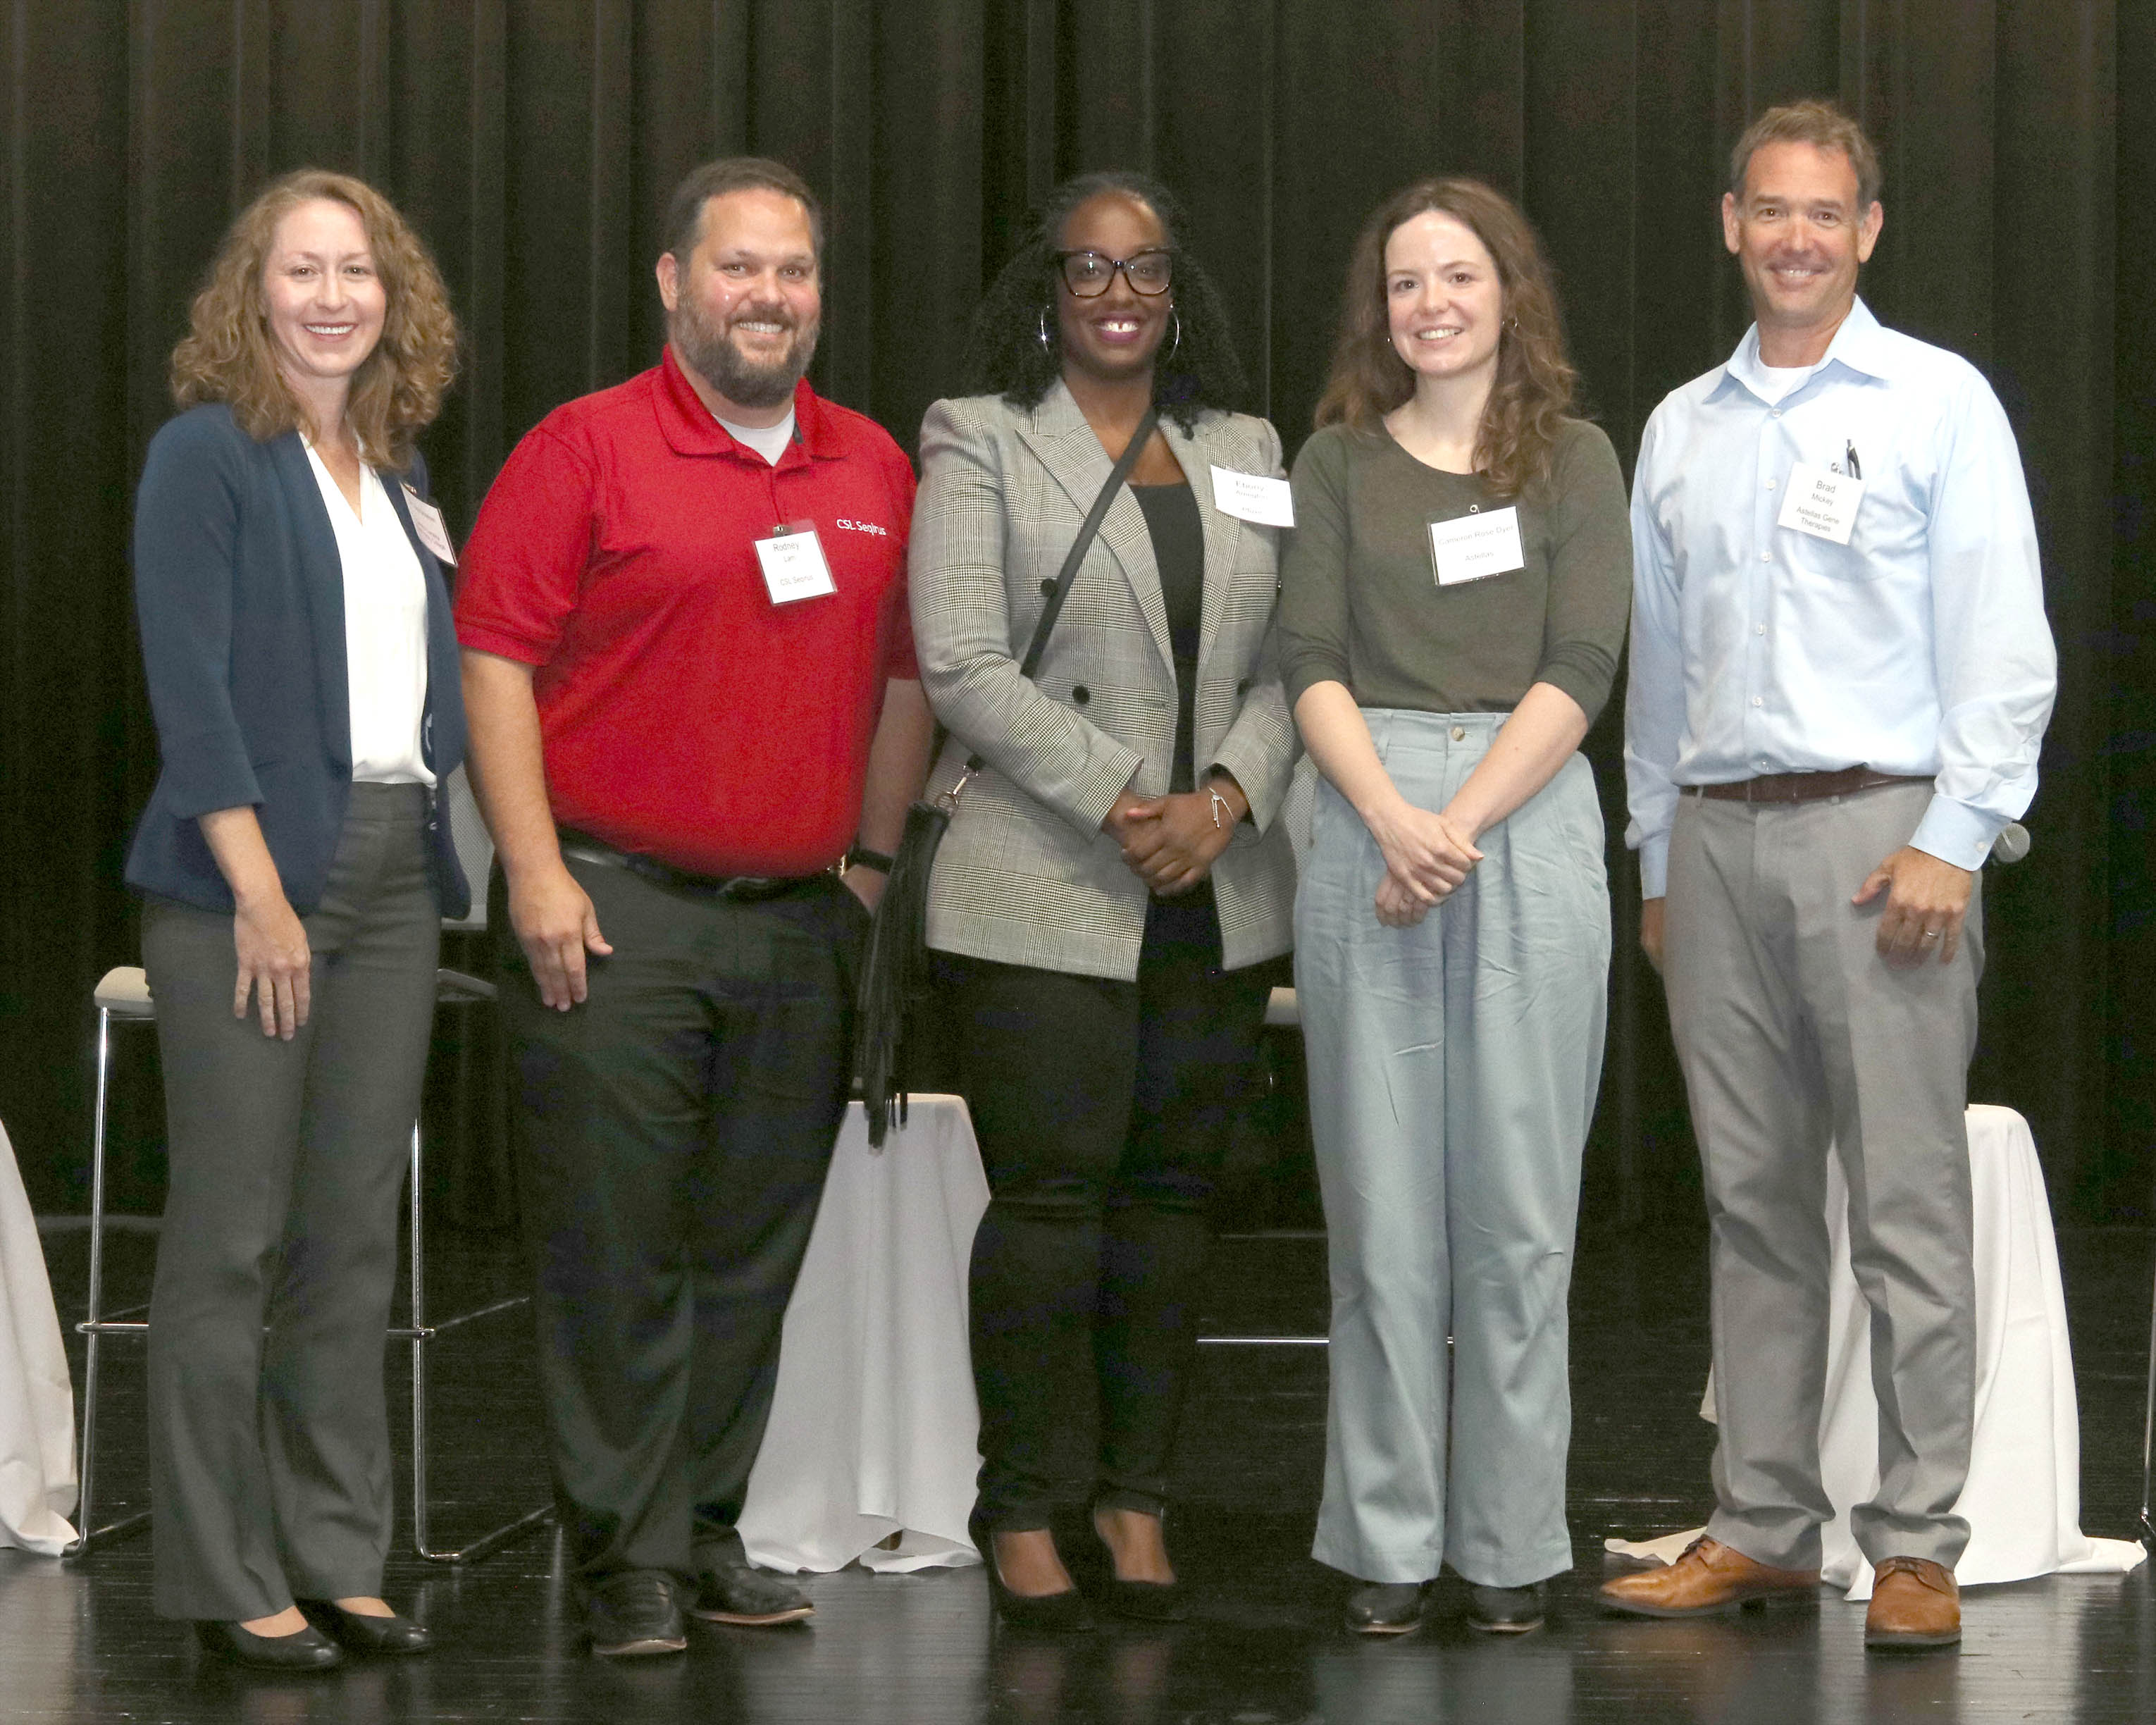 Click to enlarge,  Dr. Lisa Smelser (left), Central Carolina Community College Biotechnology Department Chair, visits with (left to right) Rodney Lam from CSL Seqirus, Ebony Arrington from Pfizer, Cameron Rose Dyer from Astellas Gene Therapies and Brad Mickey from Astellas Gene Therapies. 